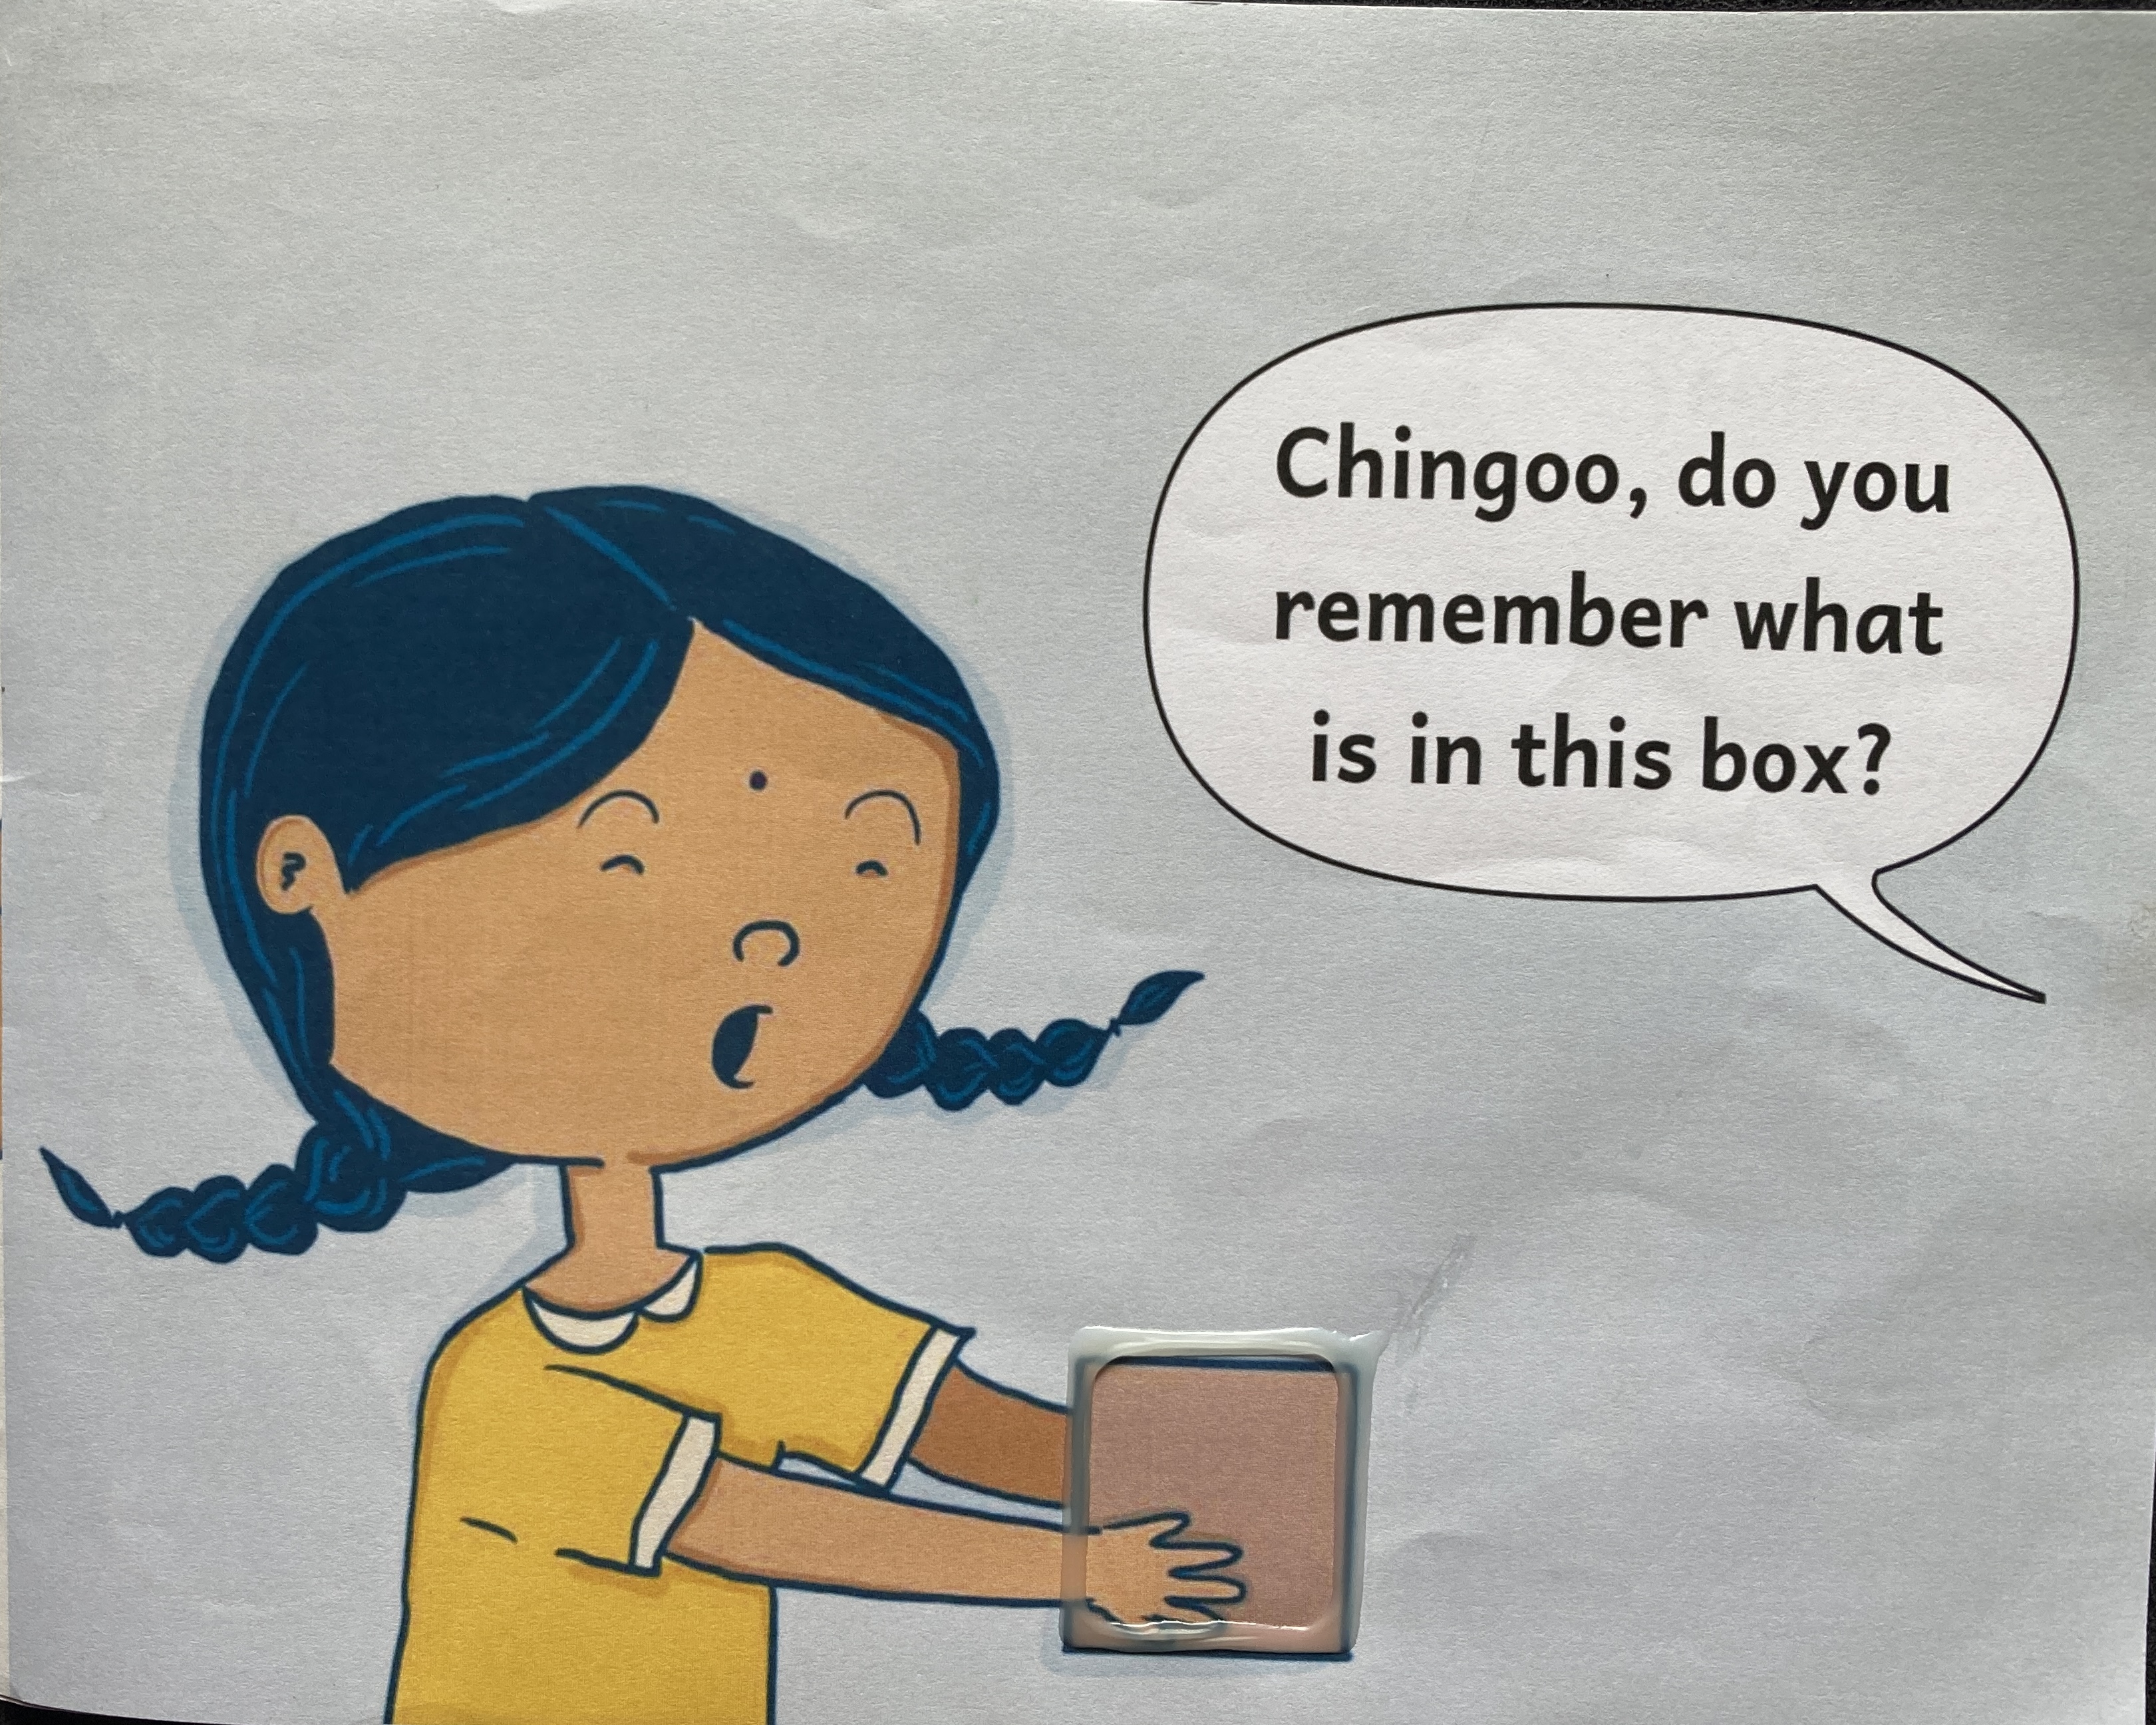 Chingoo's Ching Ching Can you remember what is in the box?